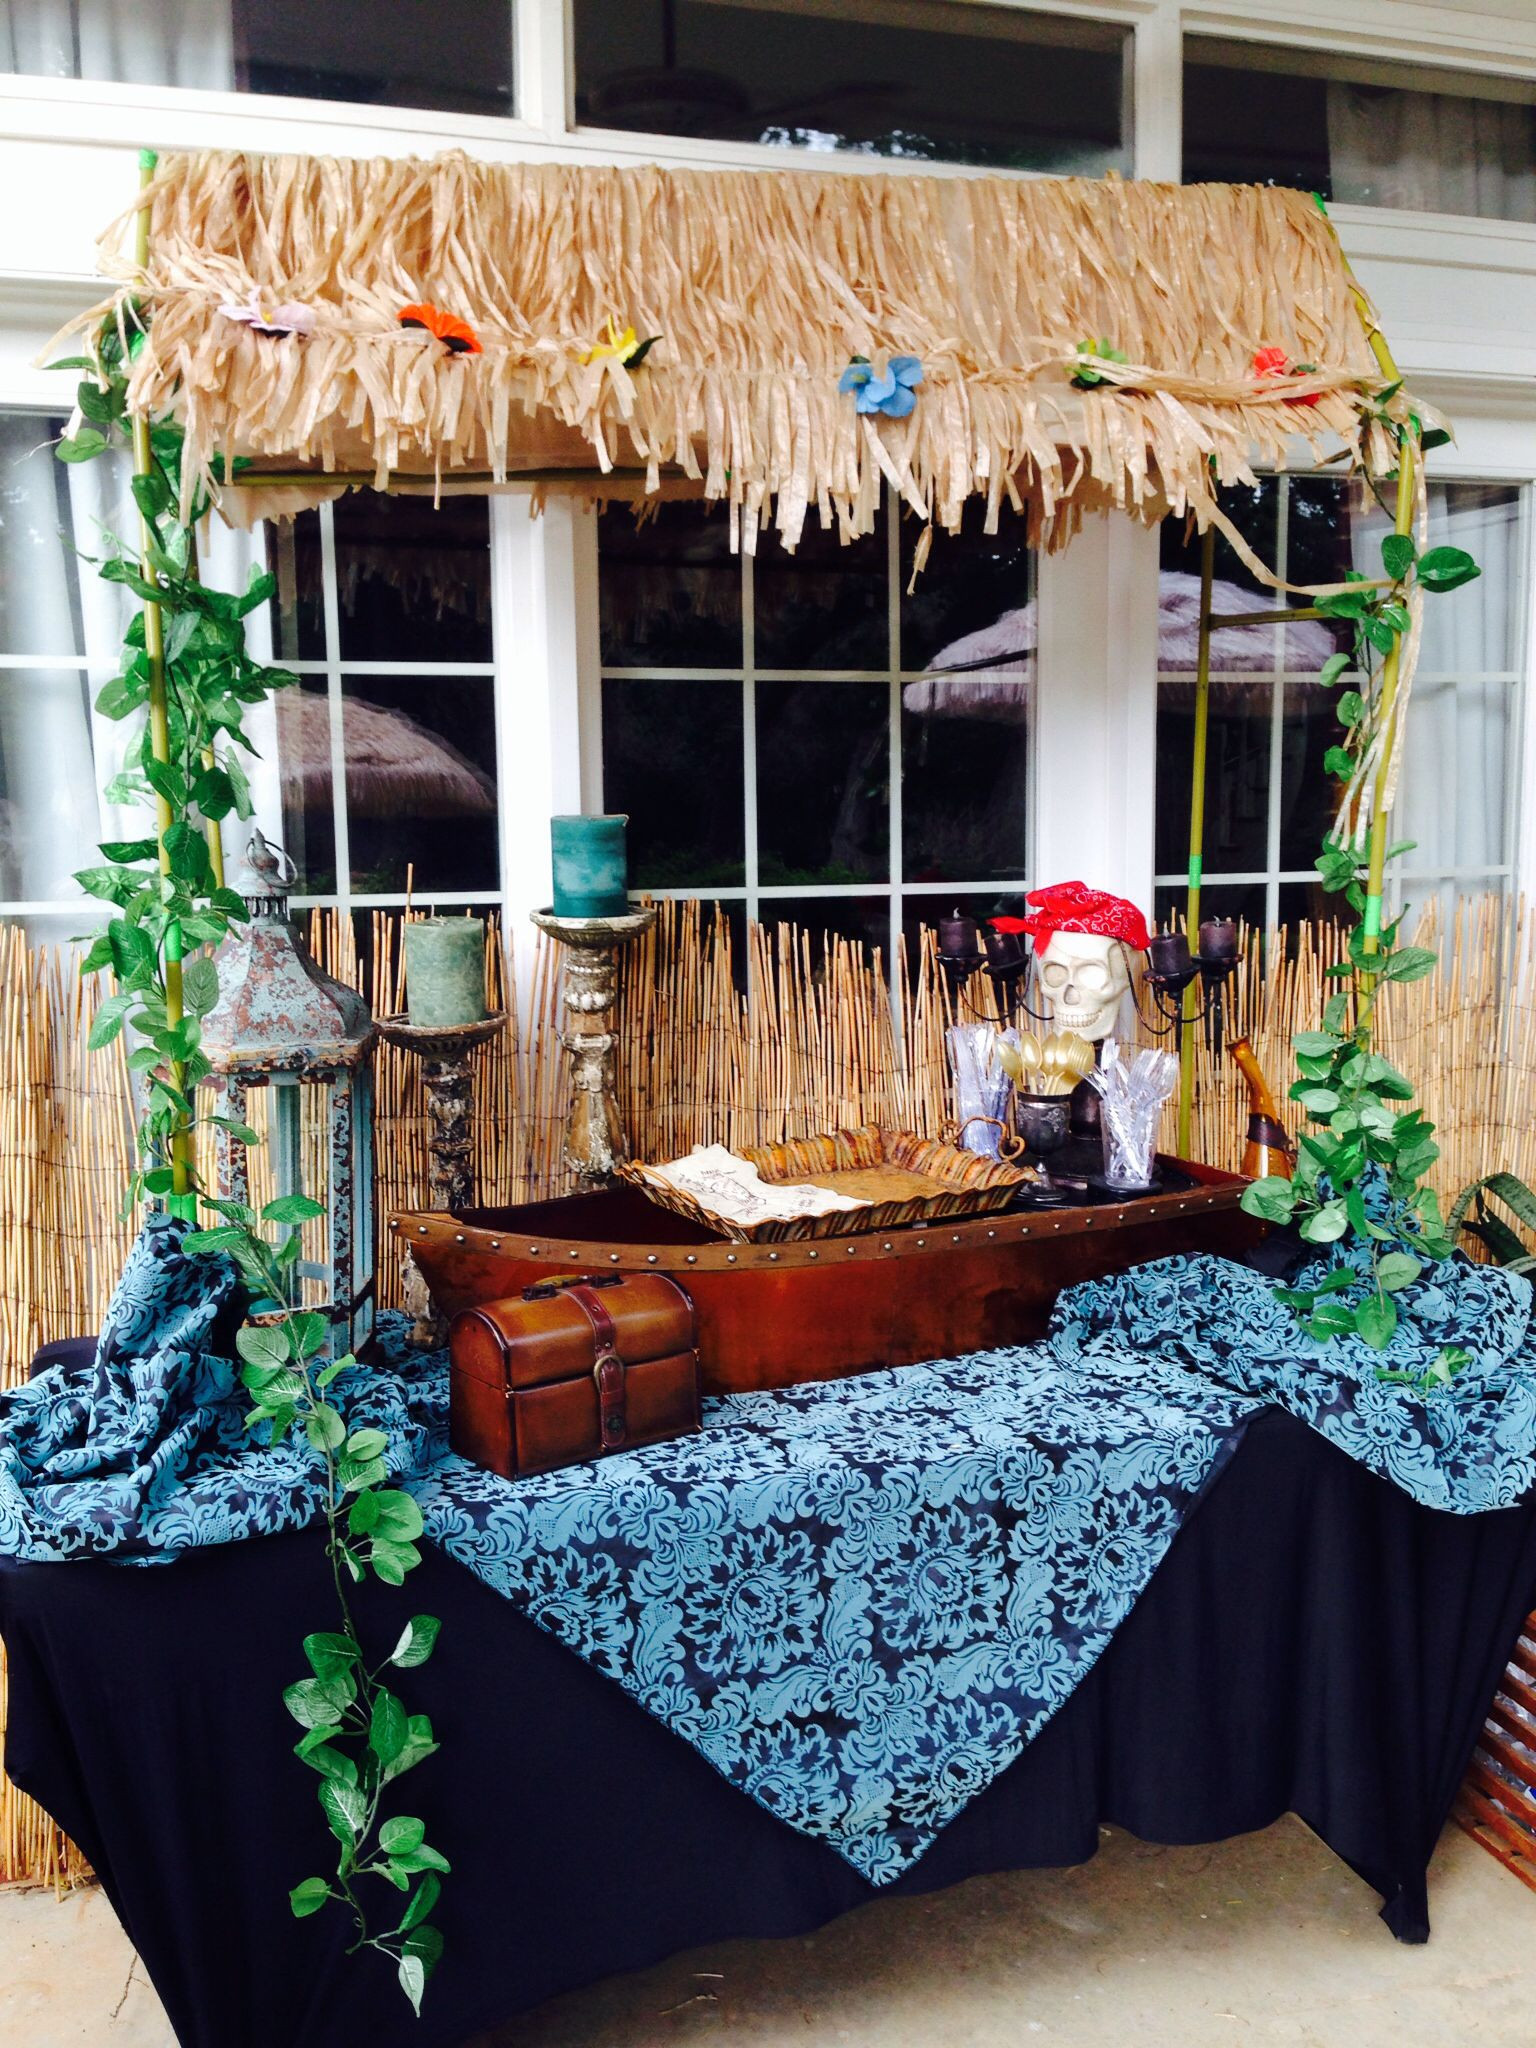 Sophisticated Graduation Party Ideas
 Sophisticated "Pirate" party for a Graduation Outdoor